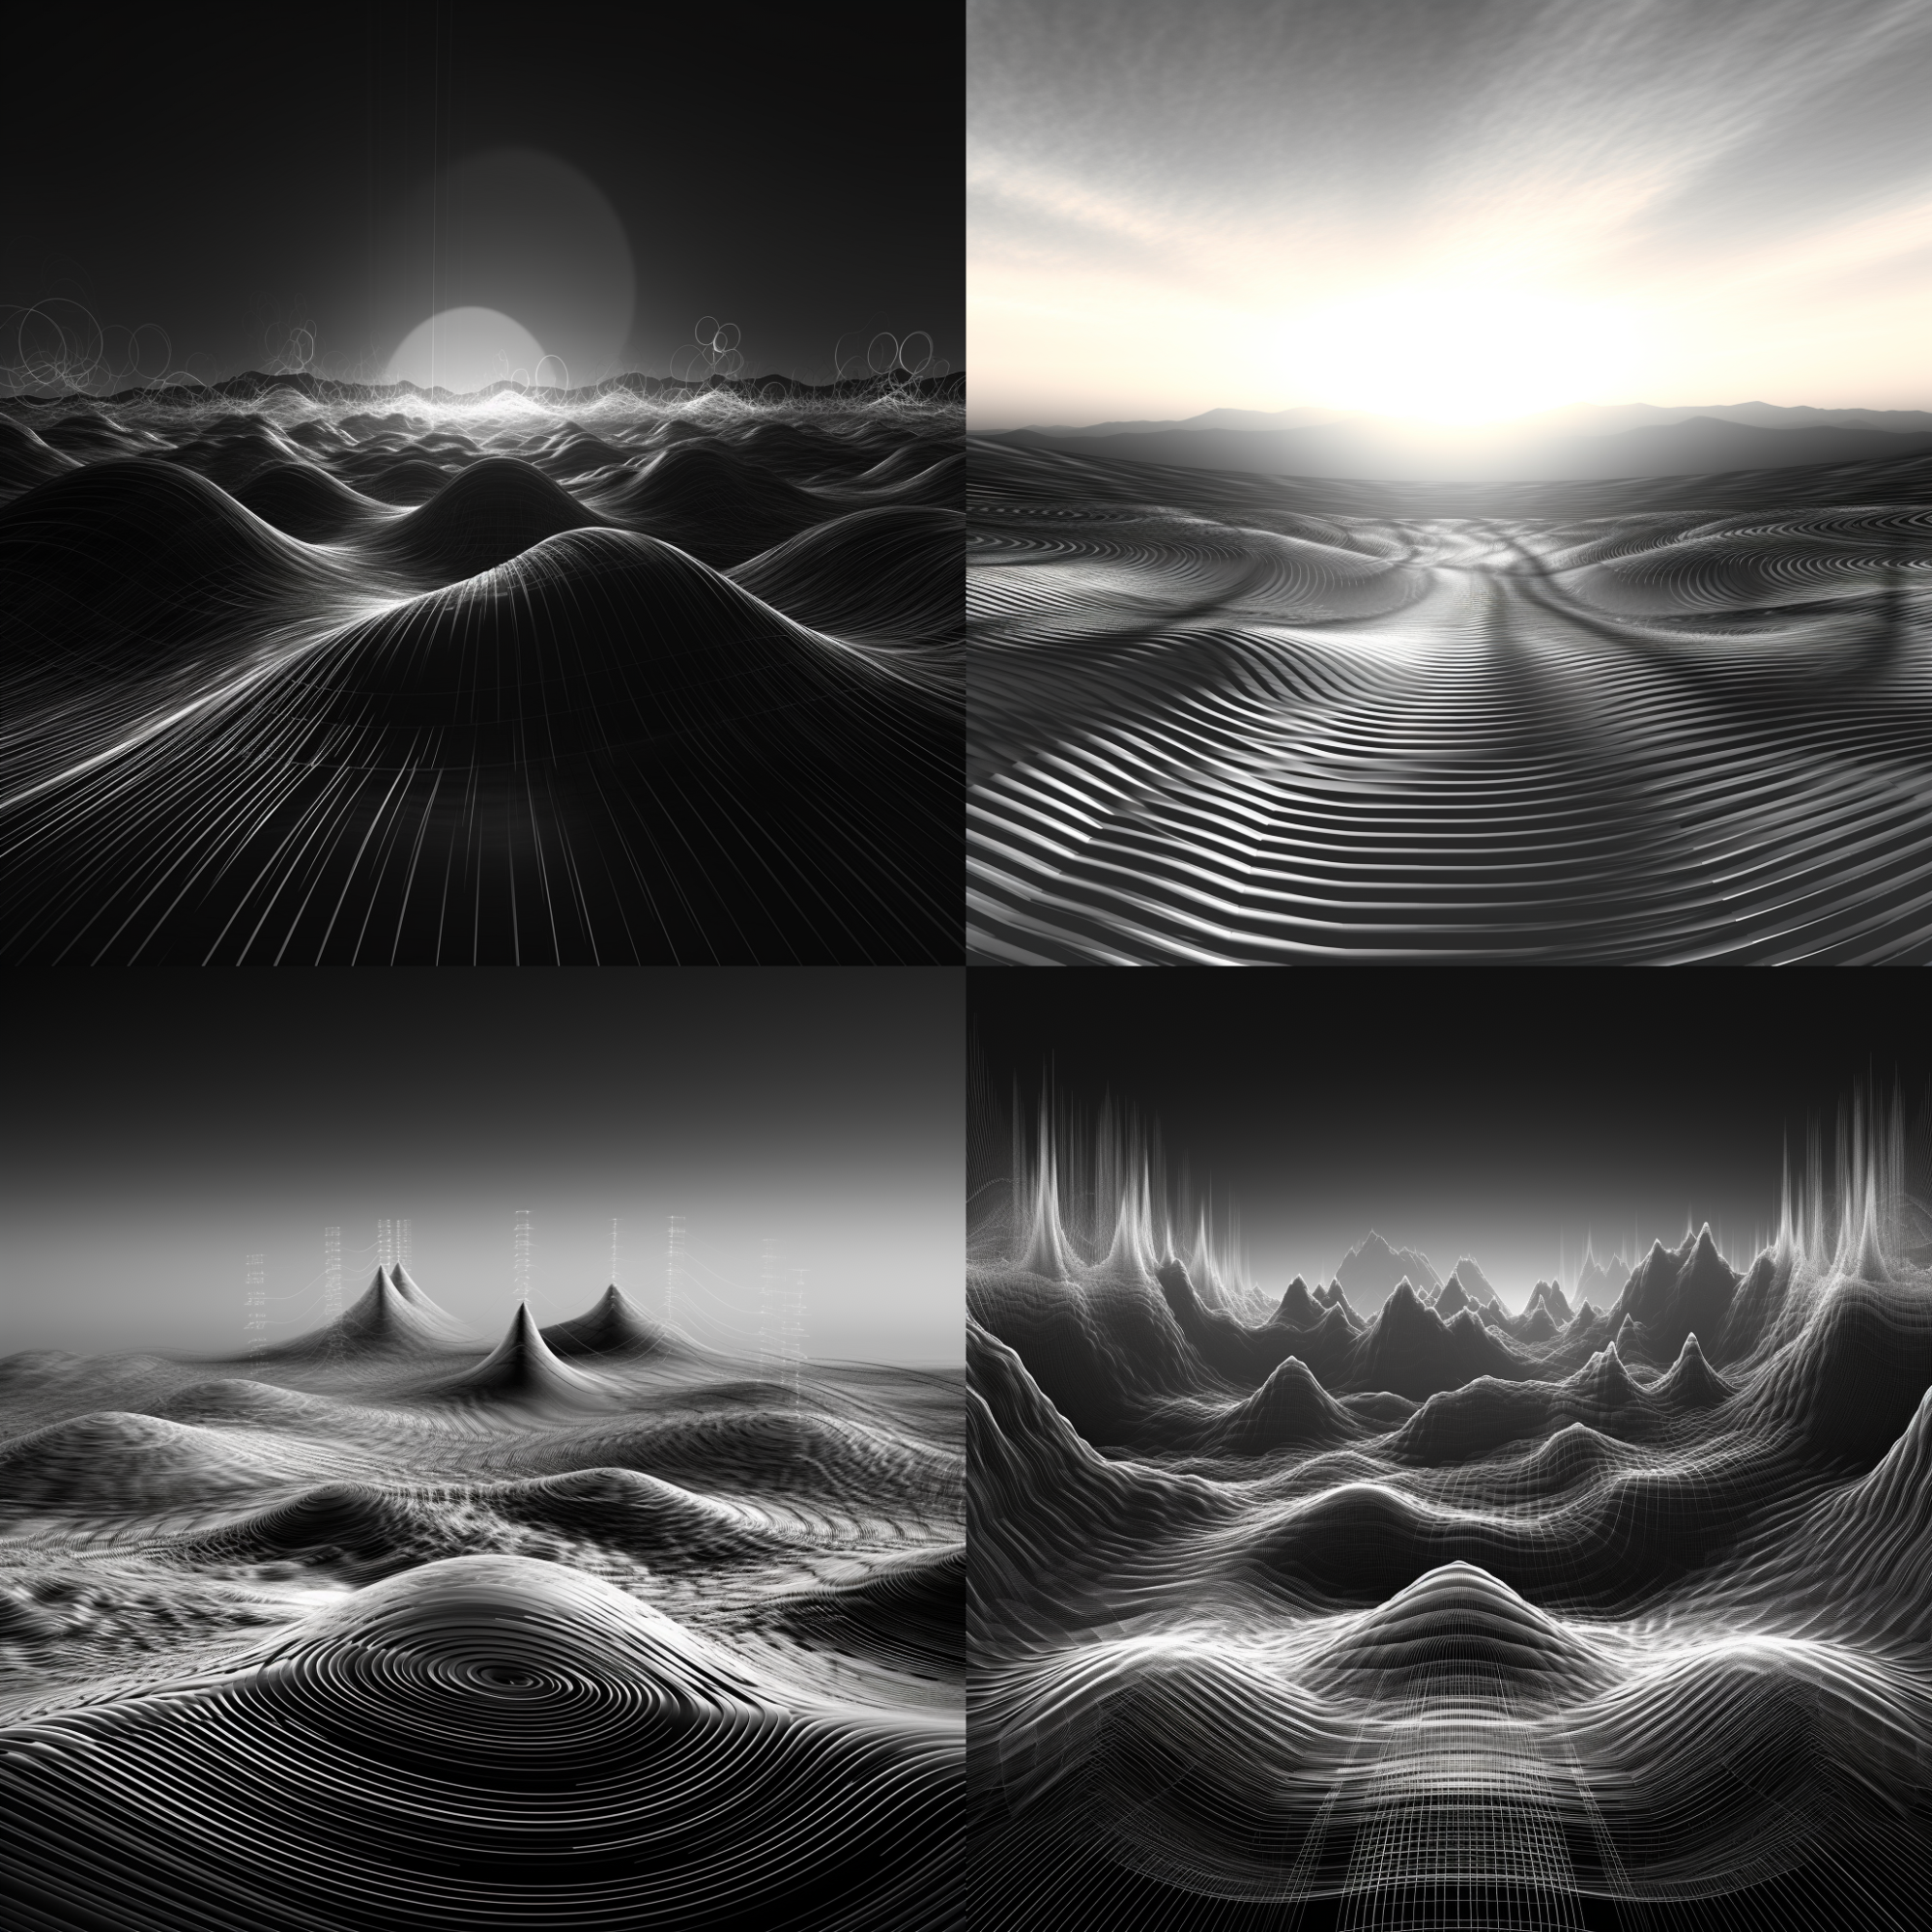 Four image options generated by Midjourney based on a radio waves render prompt